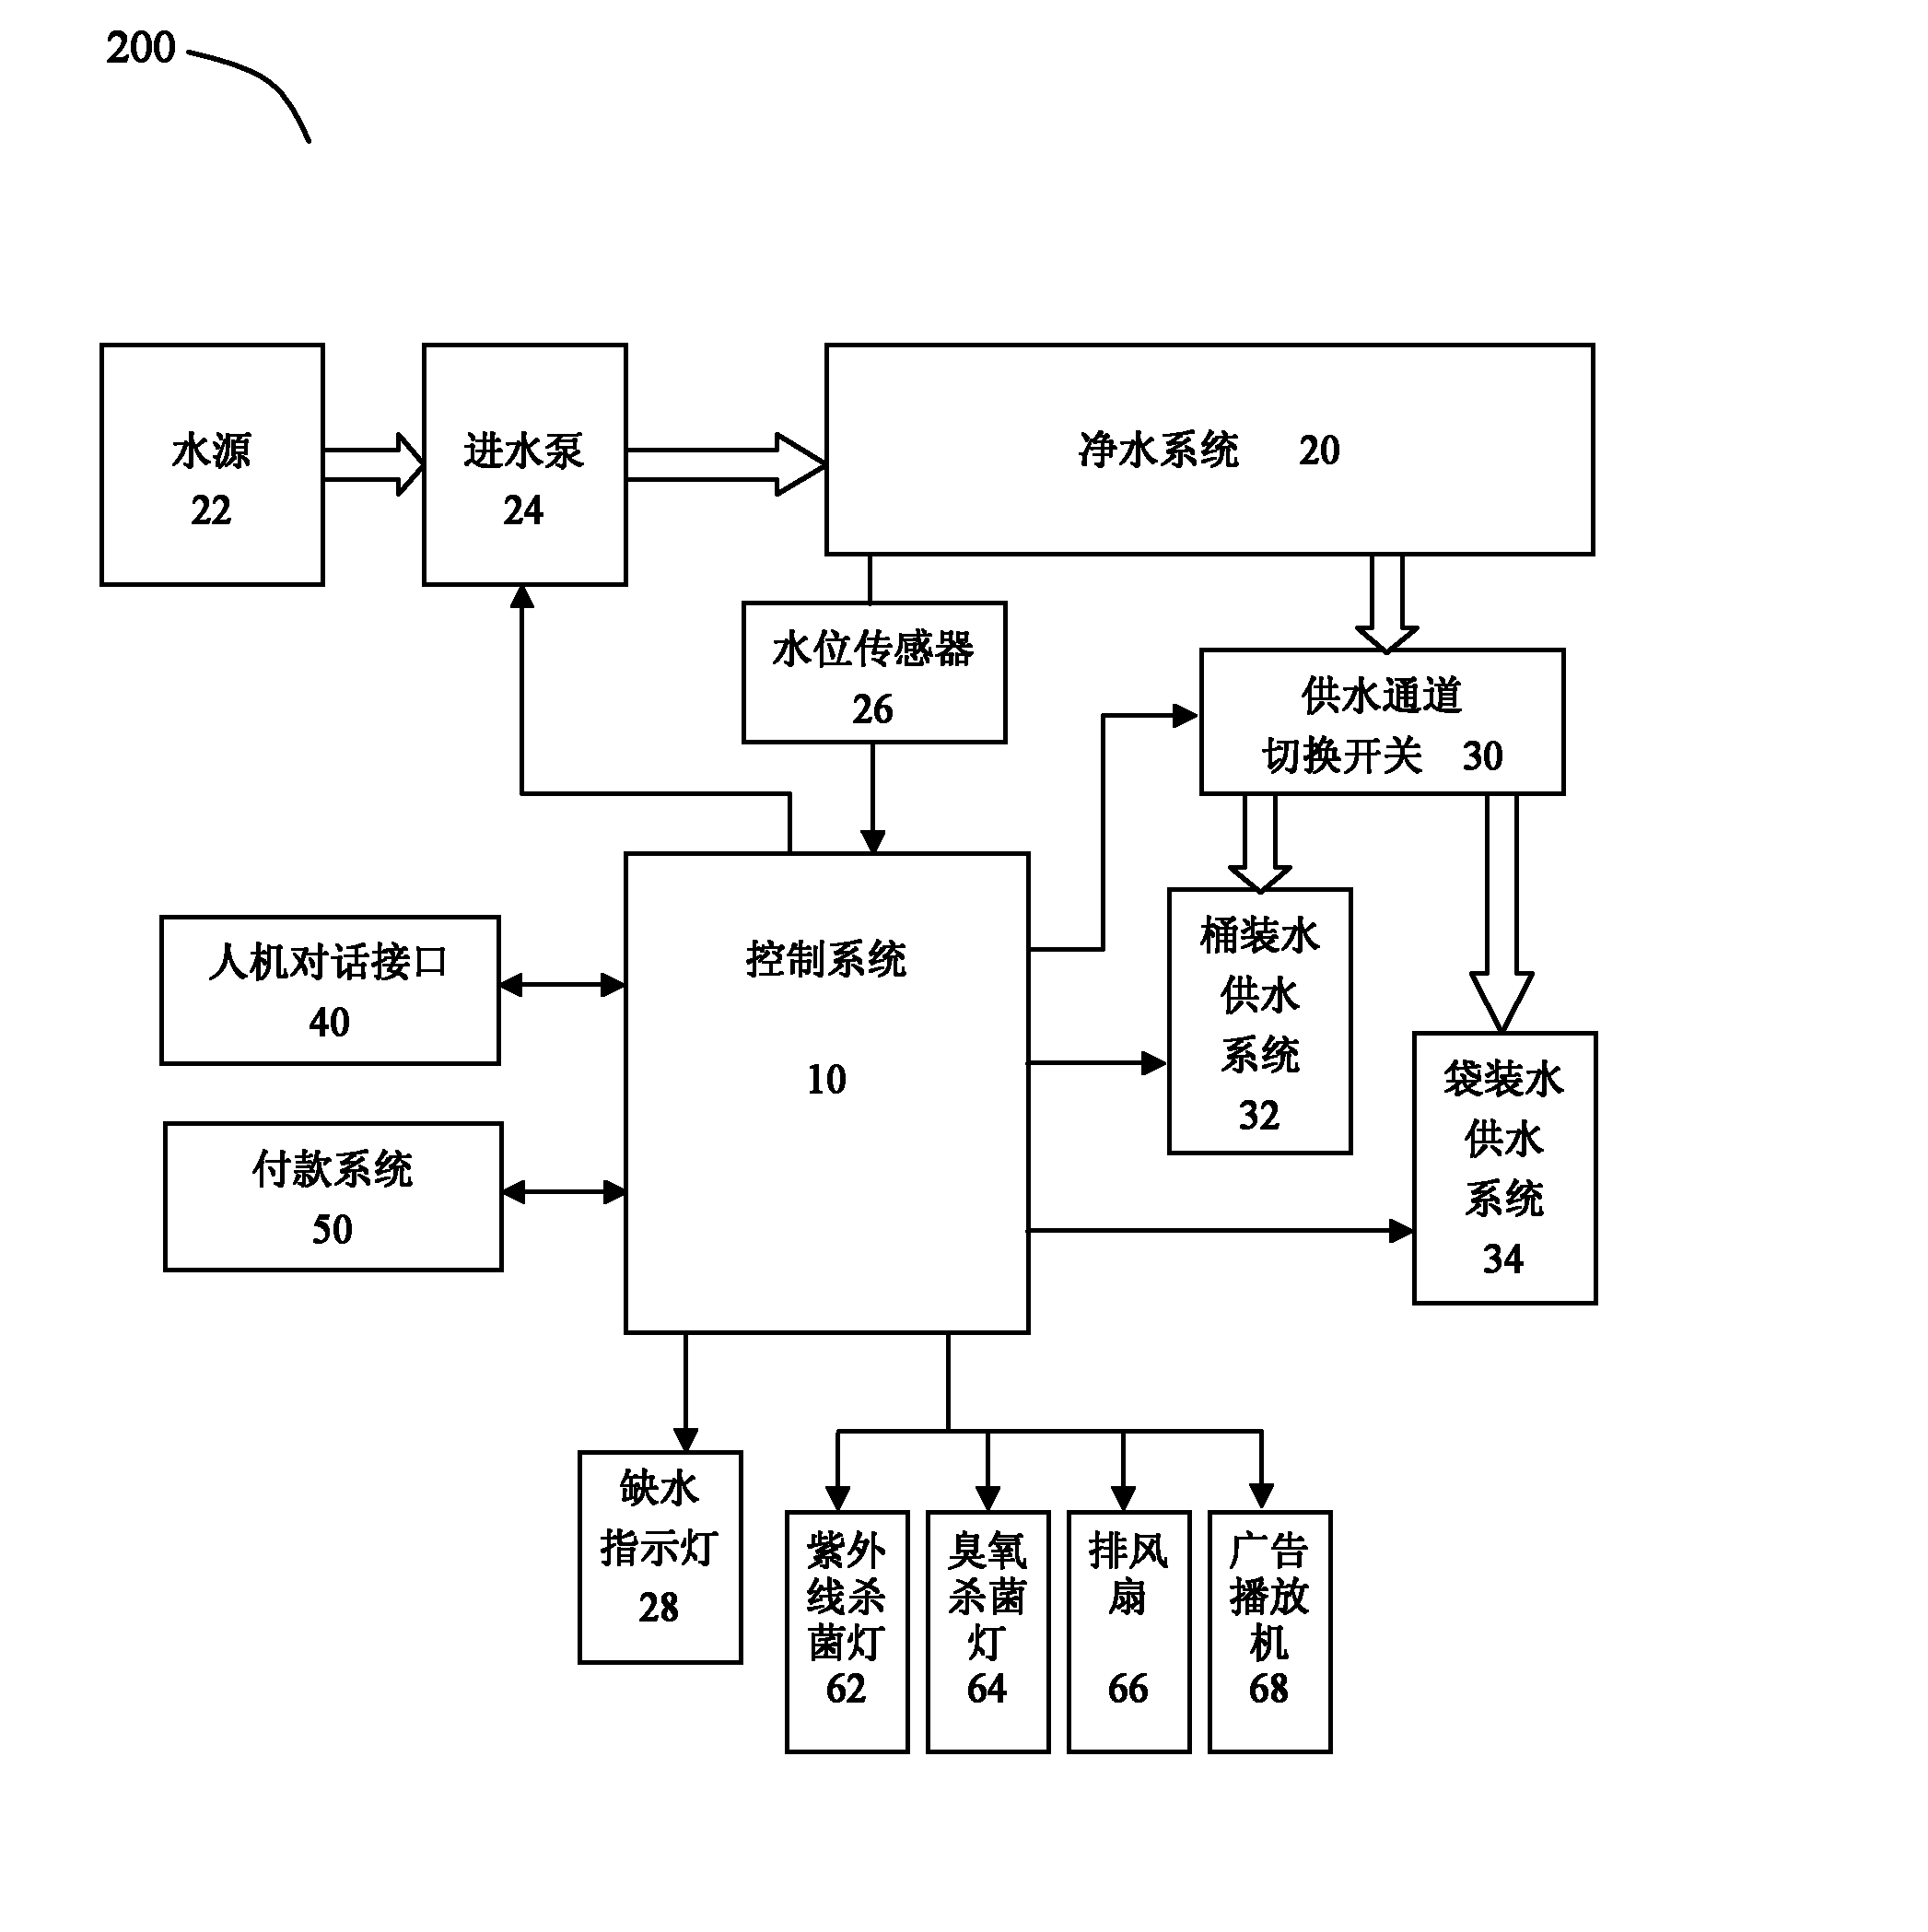 Control method and control system of automatic water dispenser